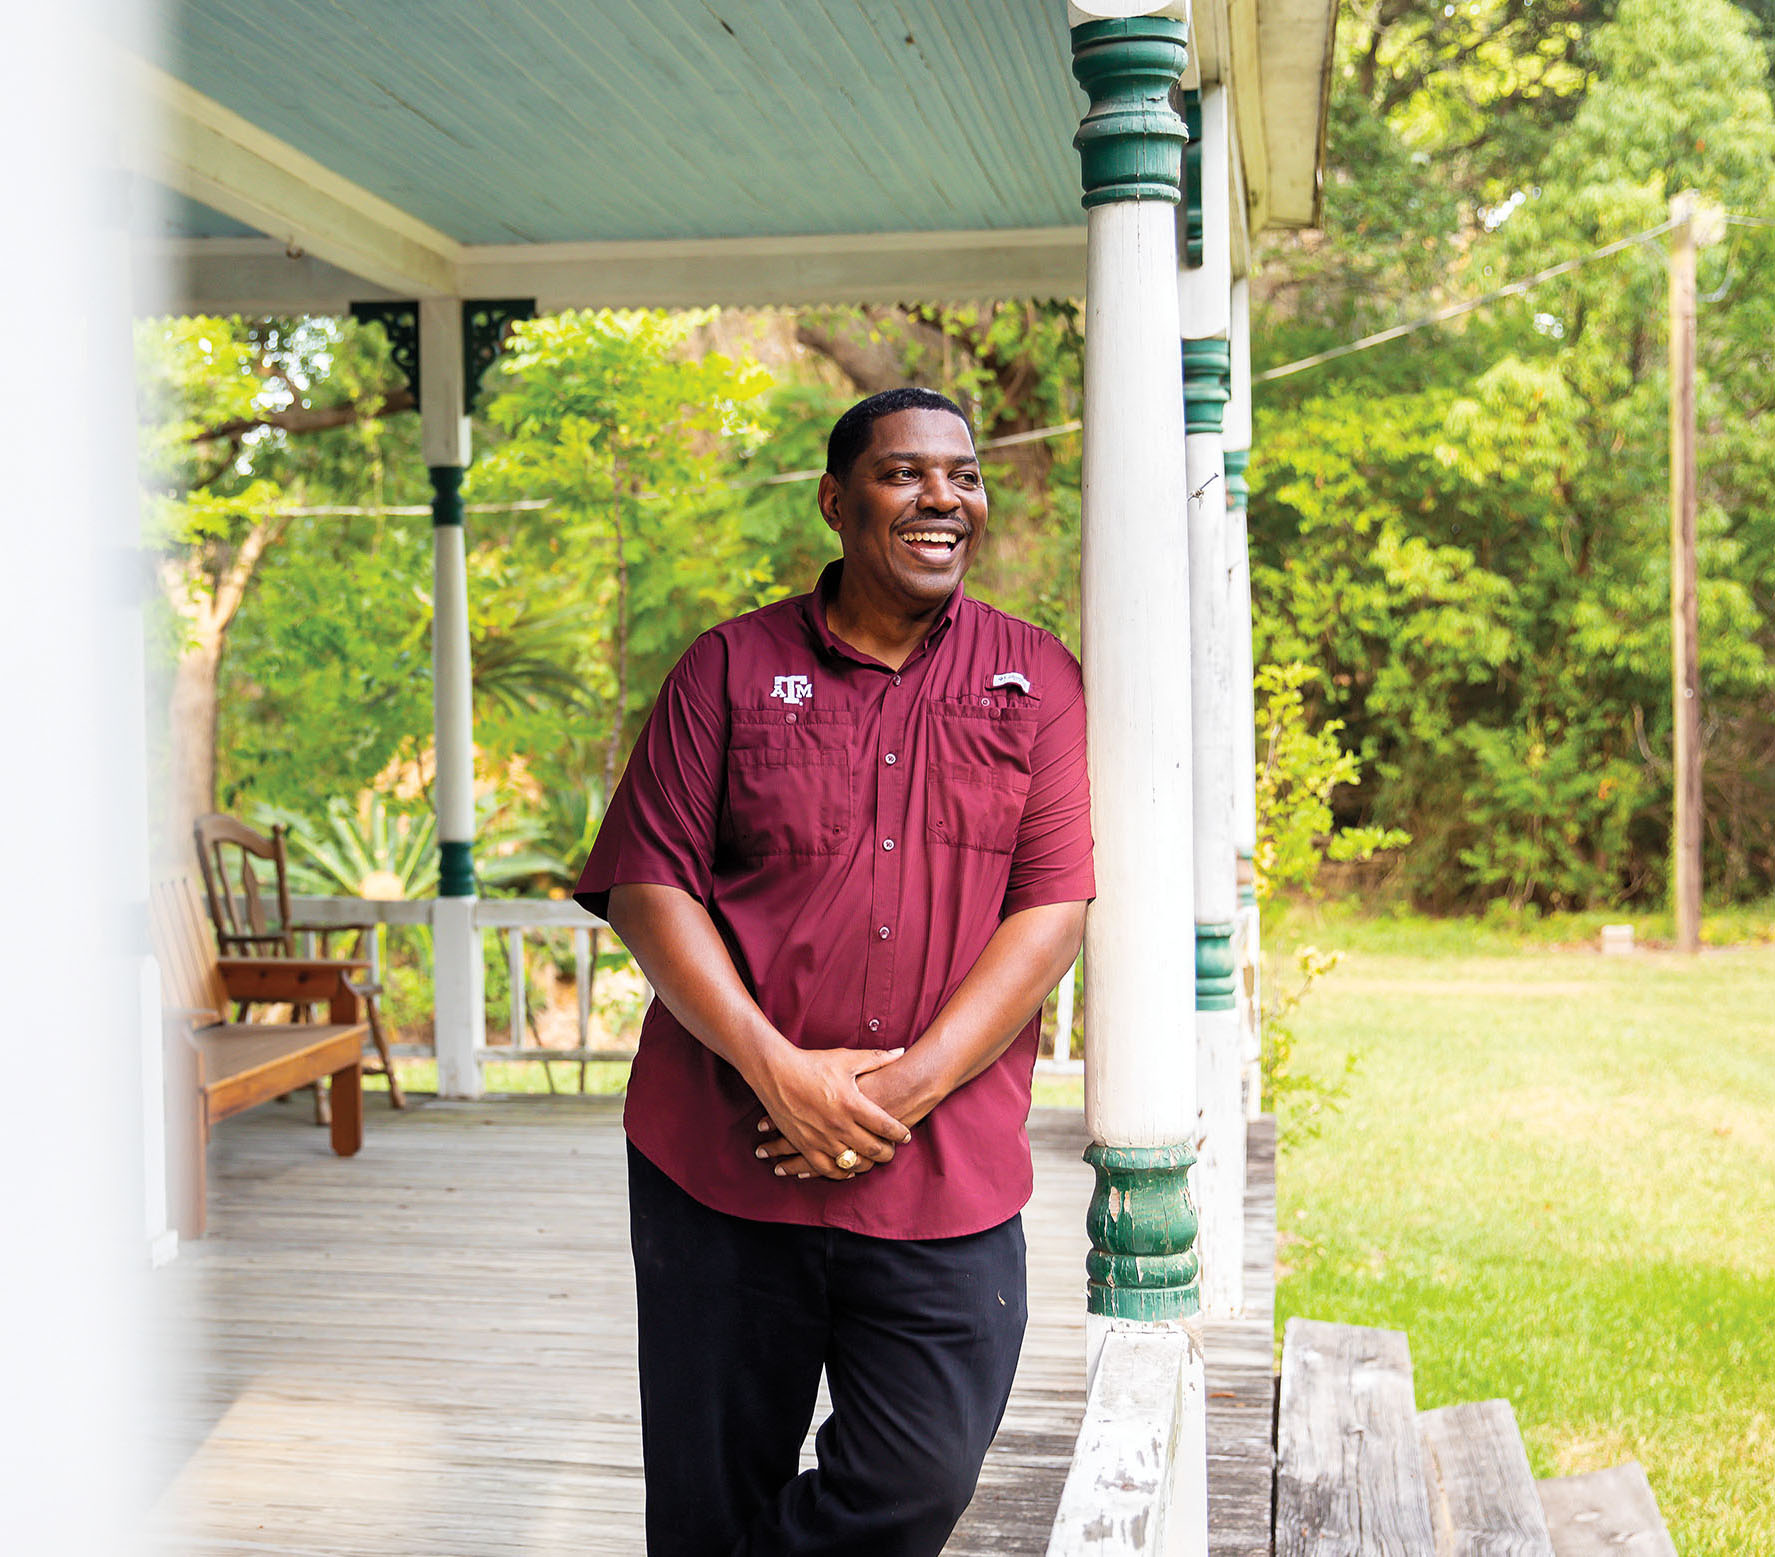 A man in a maroon Texas A&M shirt leans against a white post on a porch in a lush green area